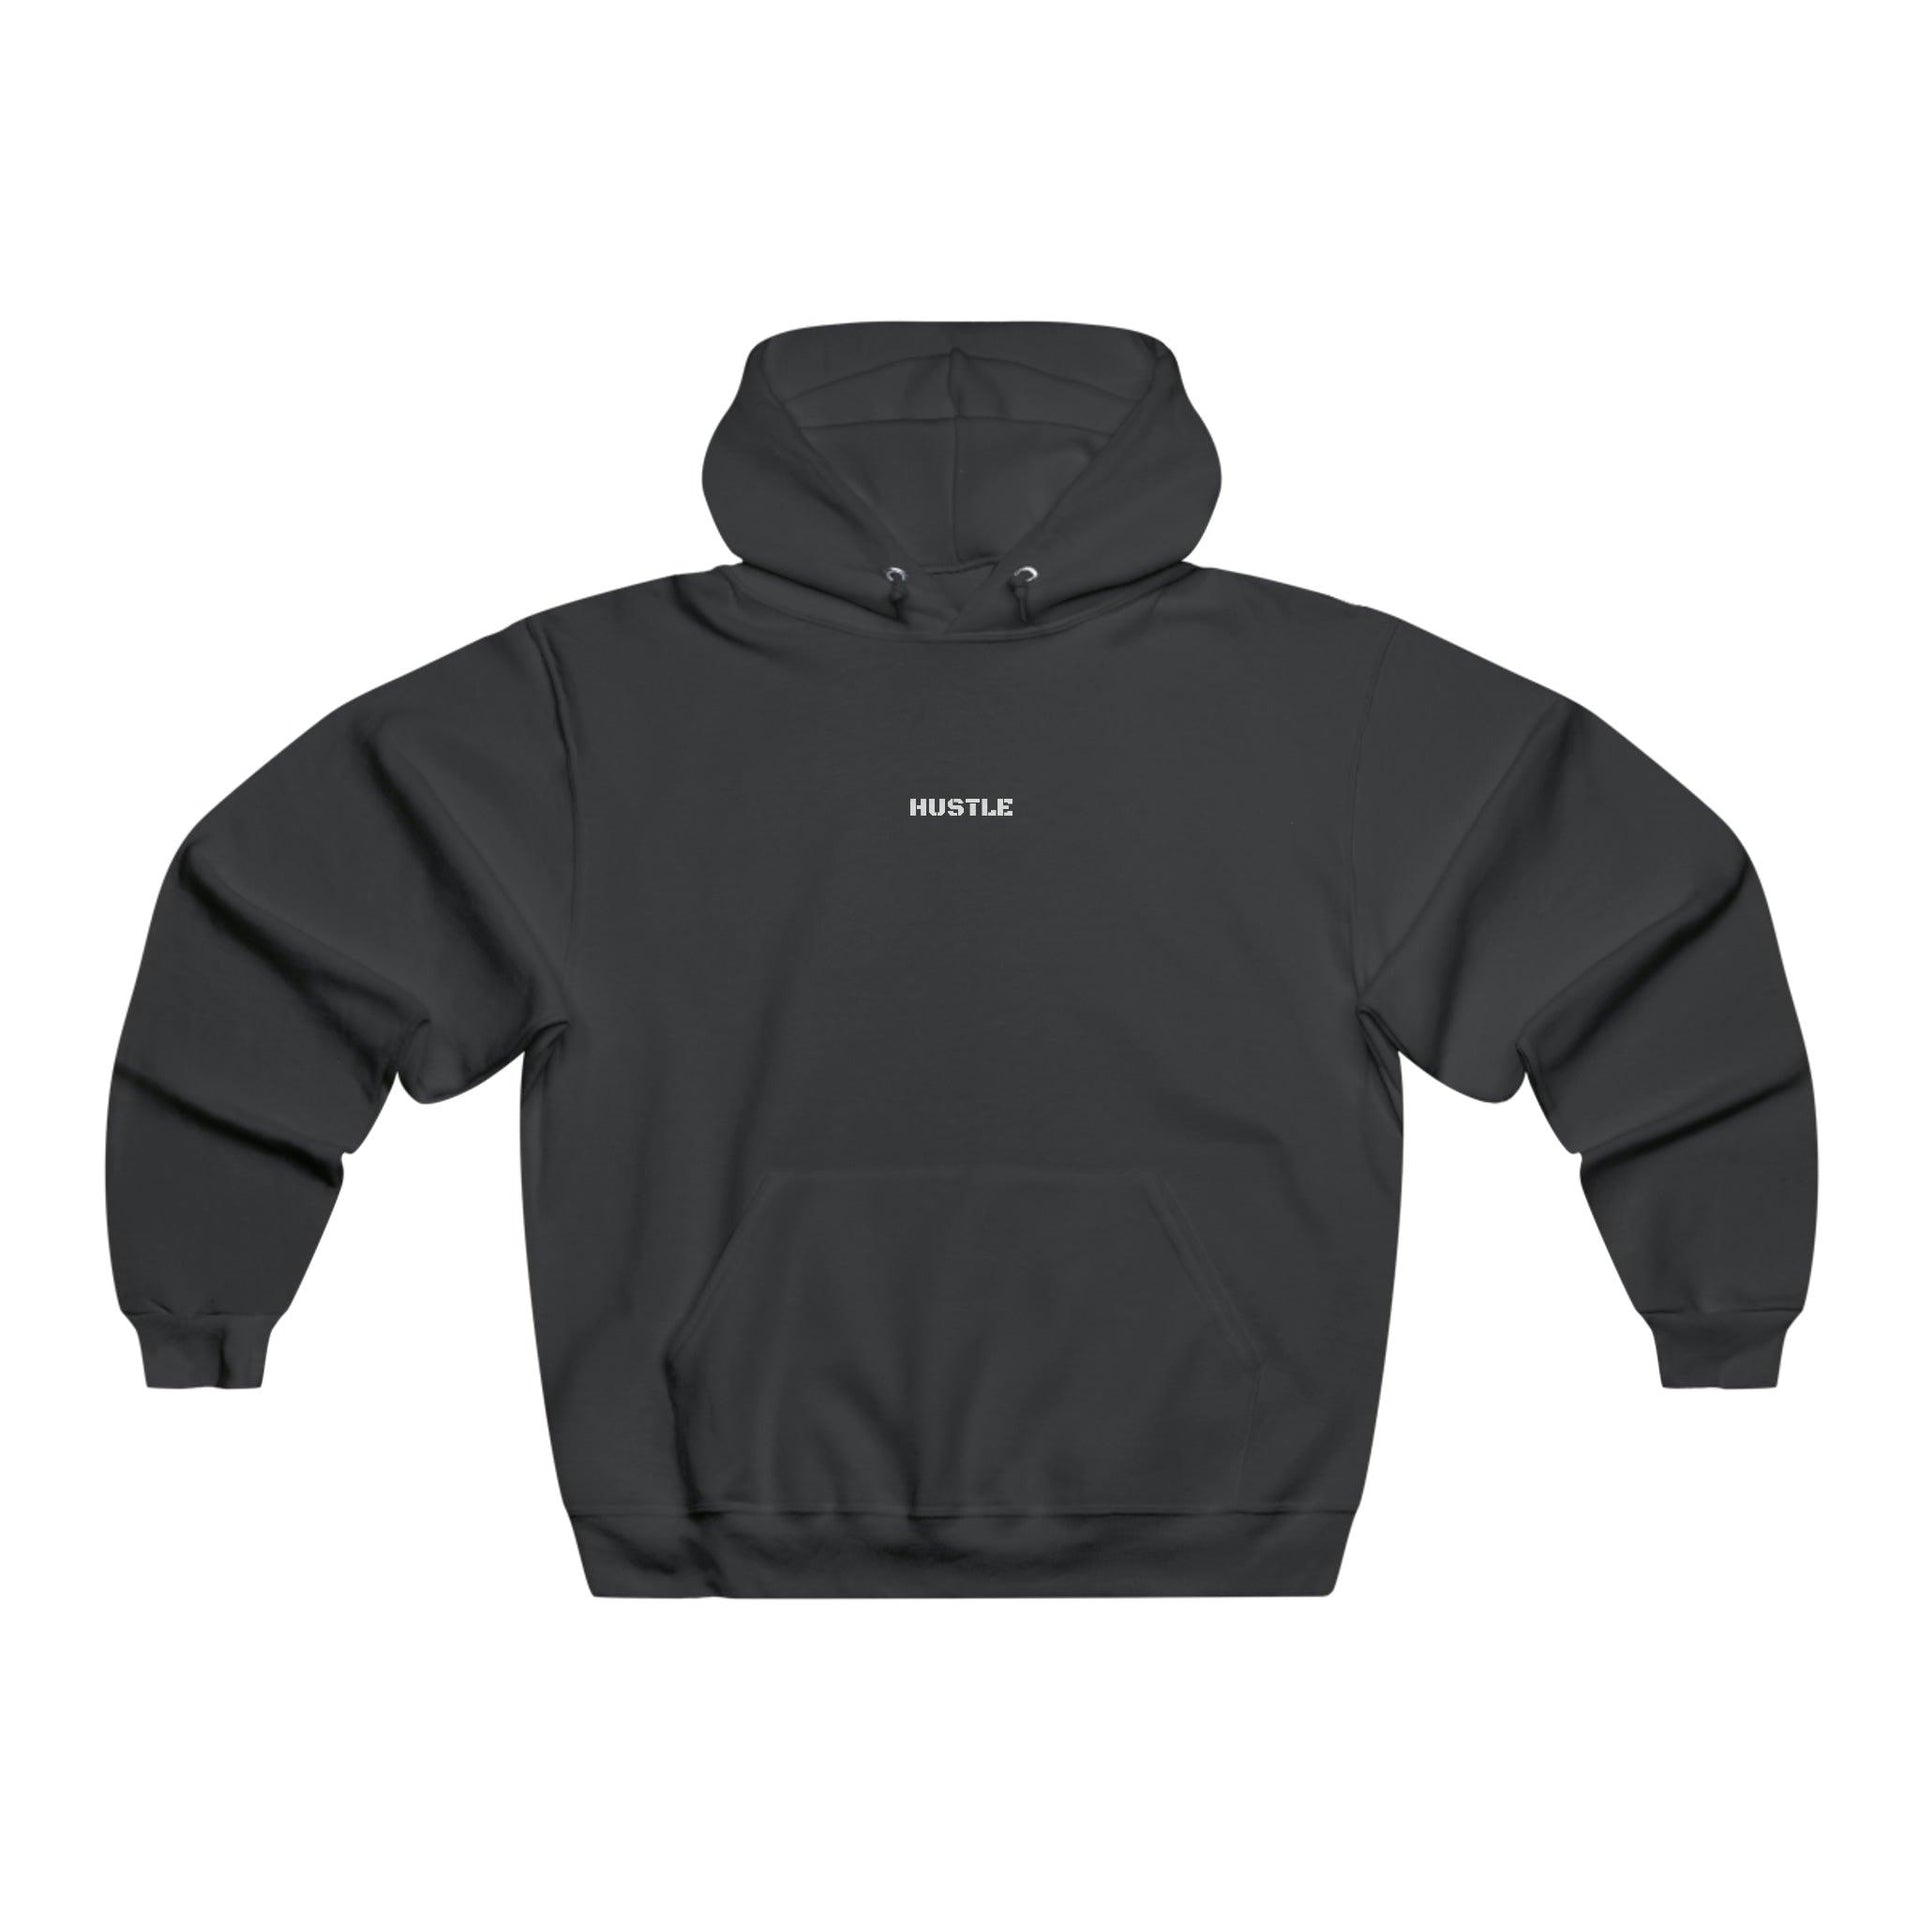 Andrew Tate Merch - New Hoodie Featuring Andrew Tate, the Top G himself and a Motivational & Inspirational Quote. - Unique Design with best Quality